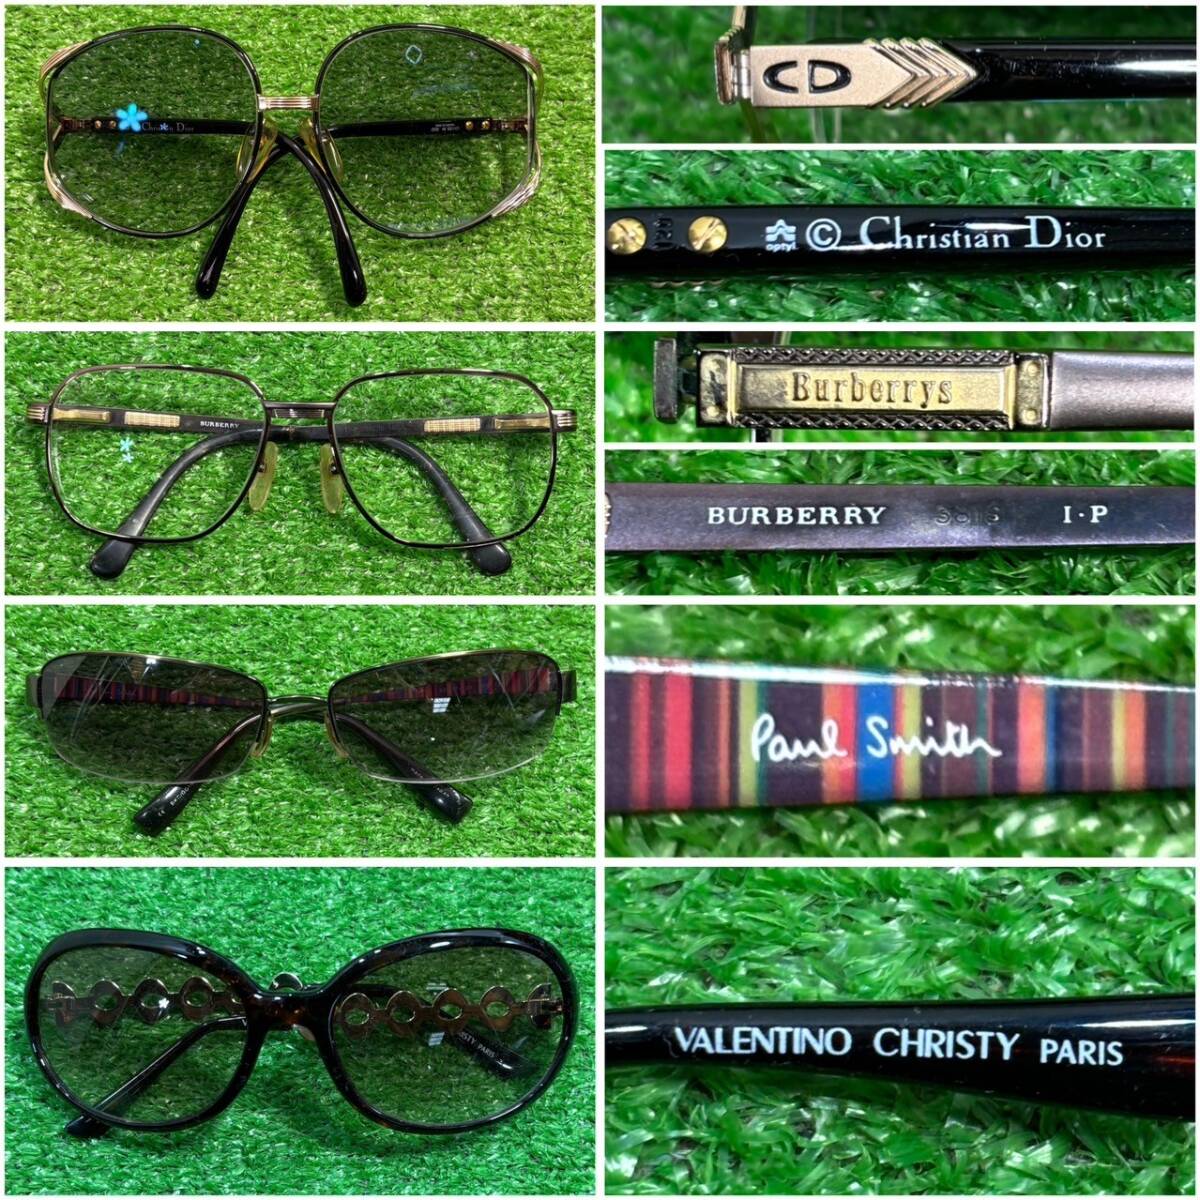 V16-120 Junk glasses sunglasses farsighted glasses approximately 8kg large amount summarize Ray-Ban Burberry Calvin Klein VALENTINO Dior PaulSmith brand have 